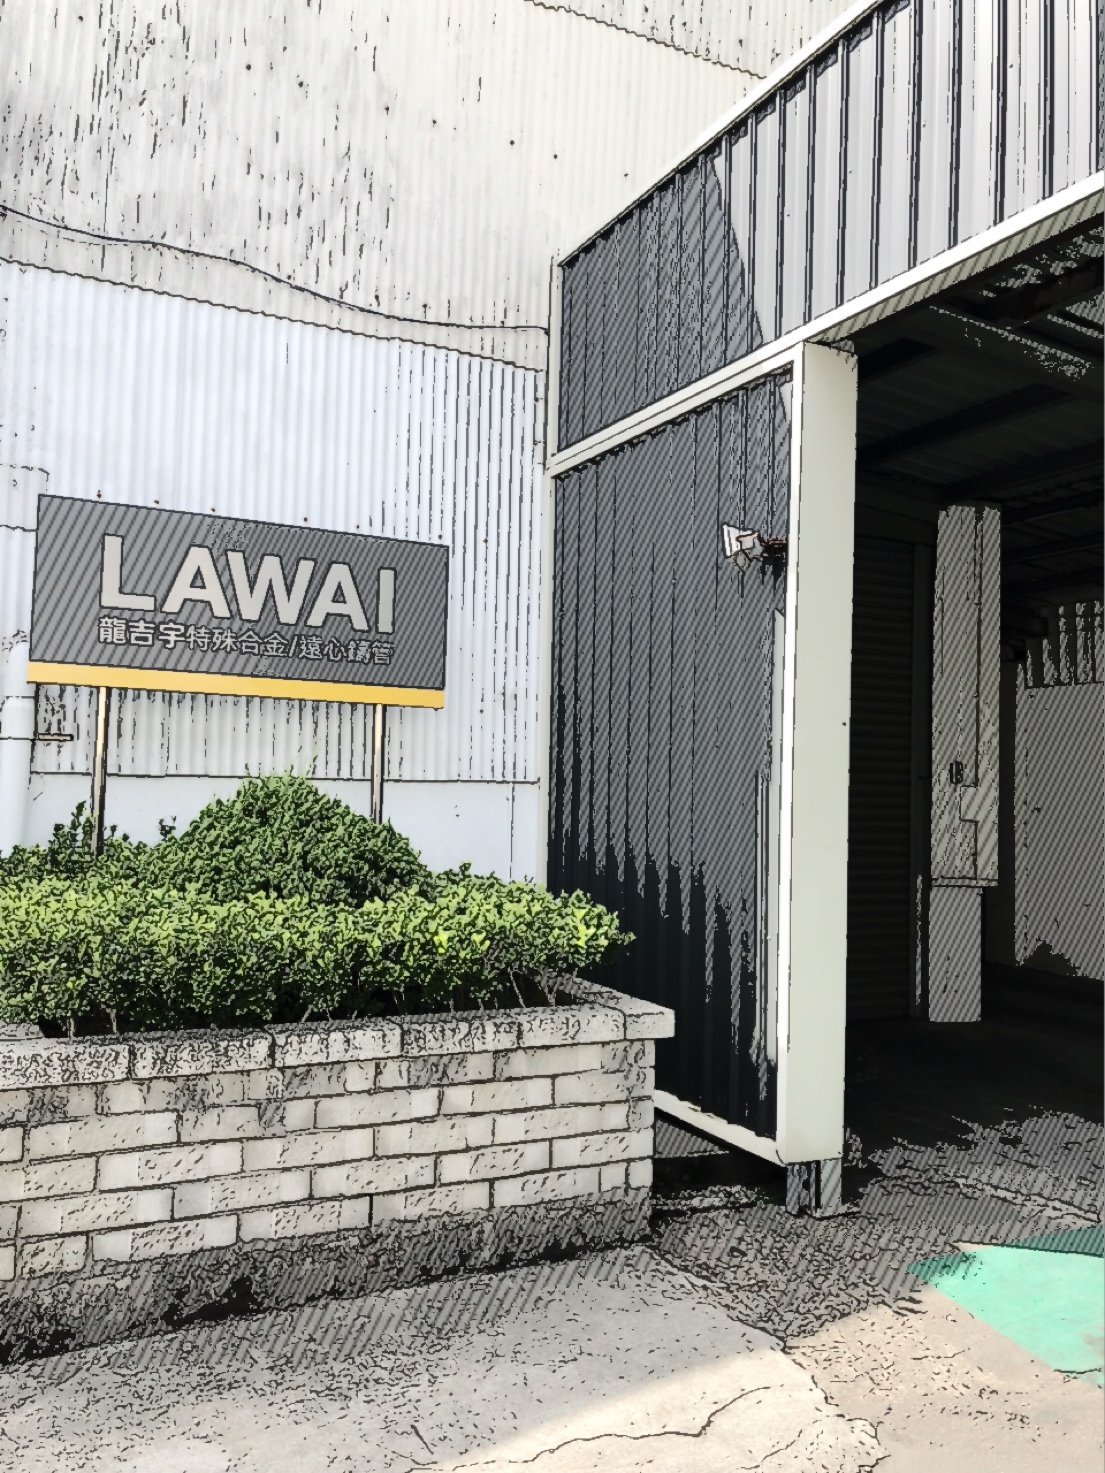 LAWAI INDUSTRIAL CORPORATION is the best centrifugal casting manufacturer in Taiwan